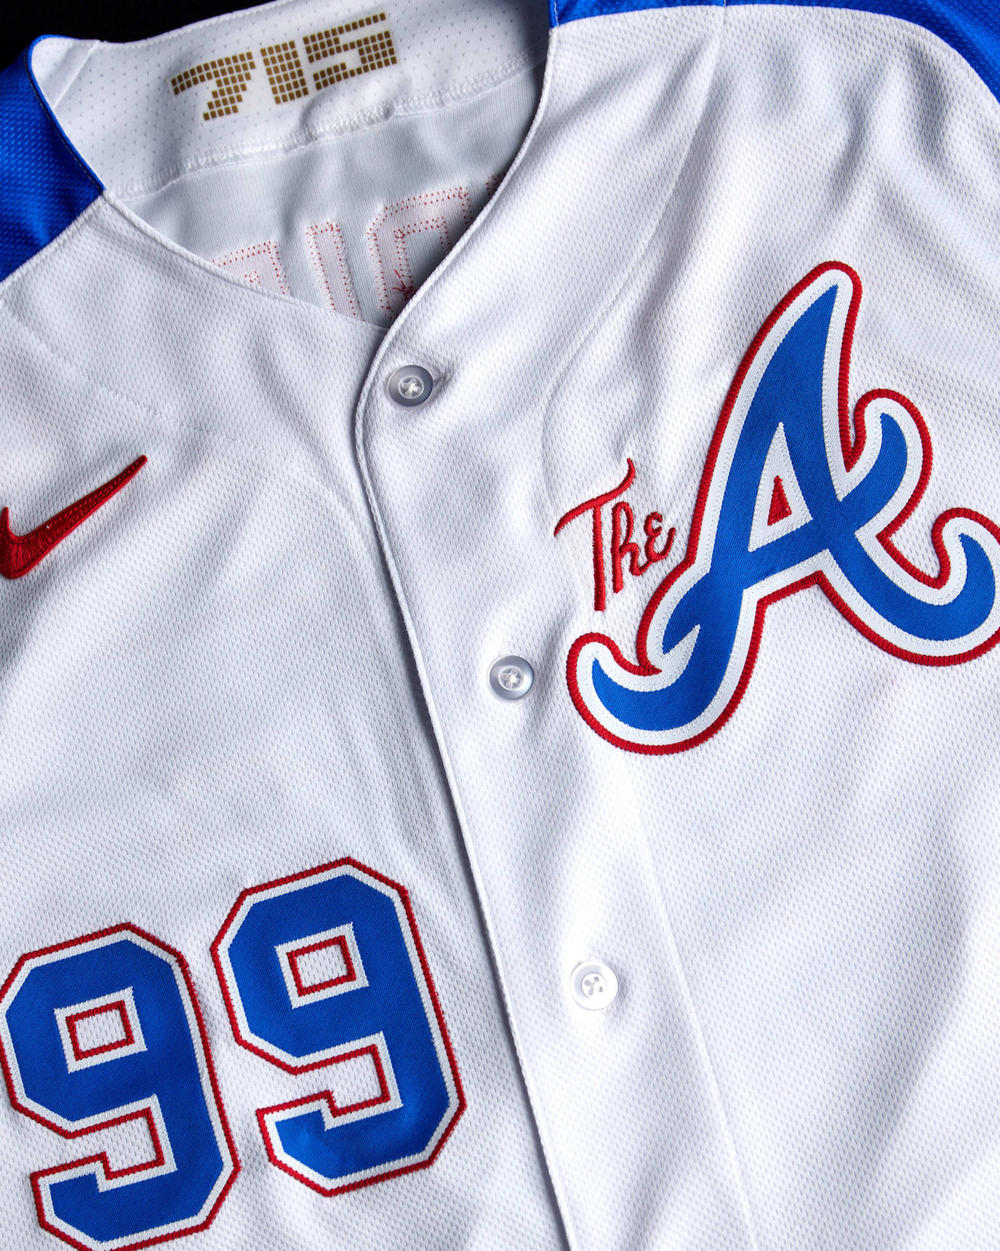 Braves unveil 'City Connect' jersey in video featuring Billye